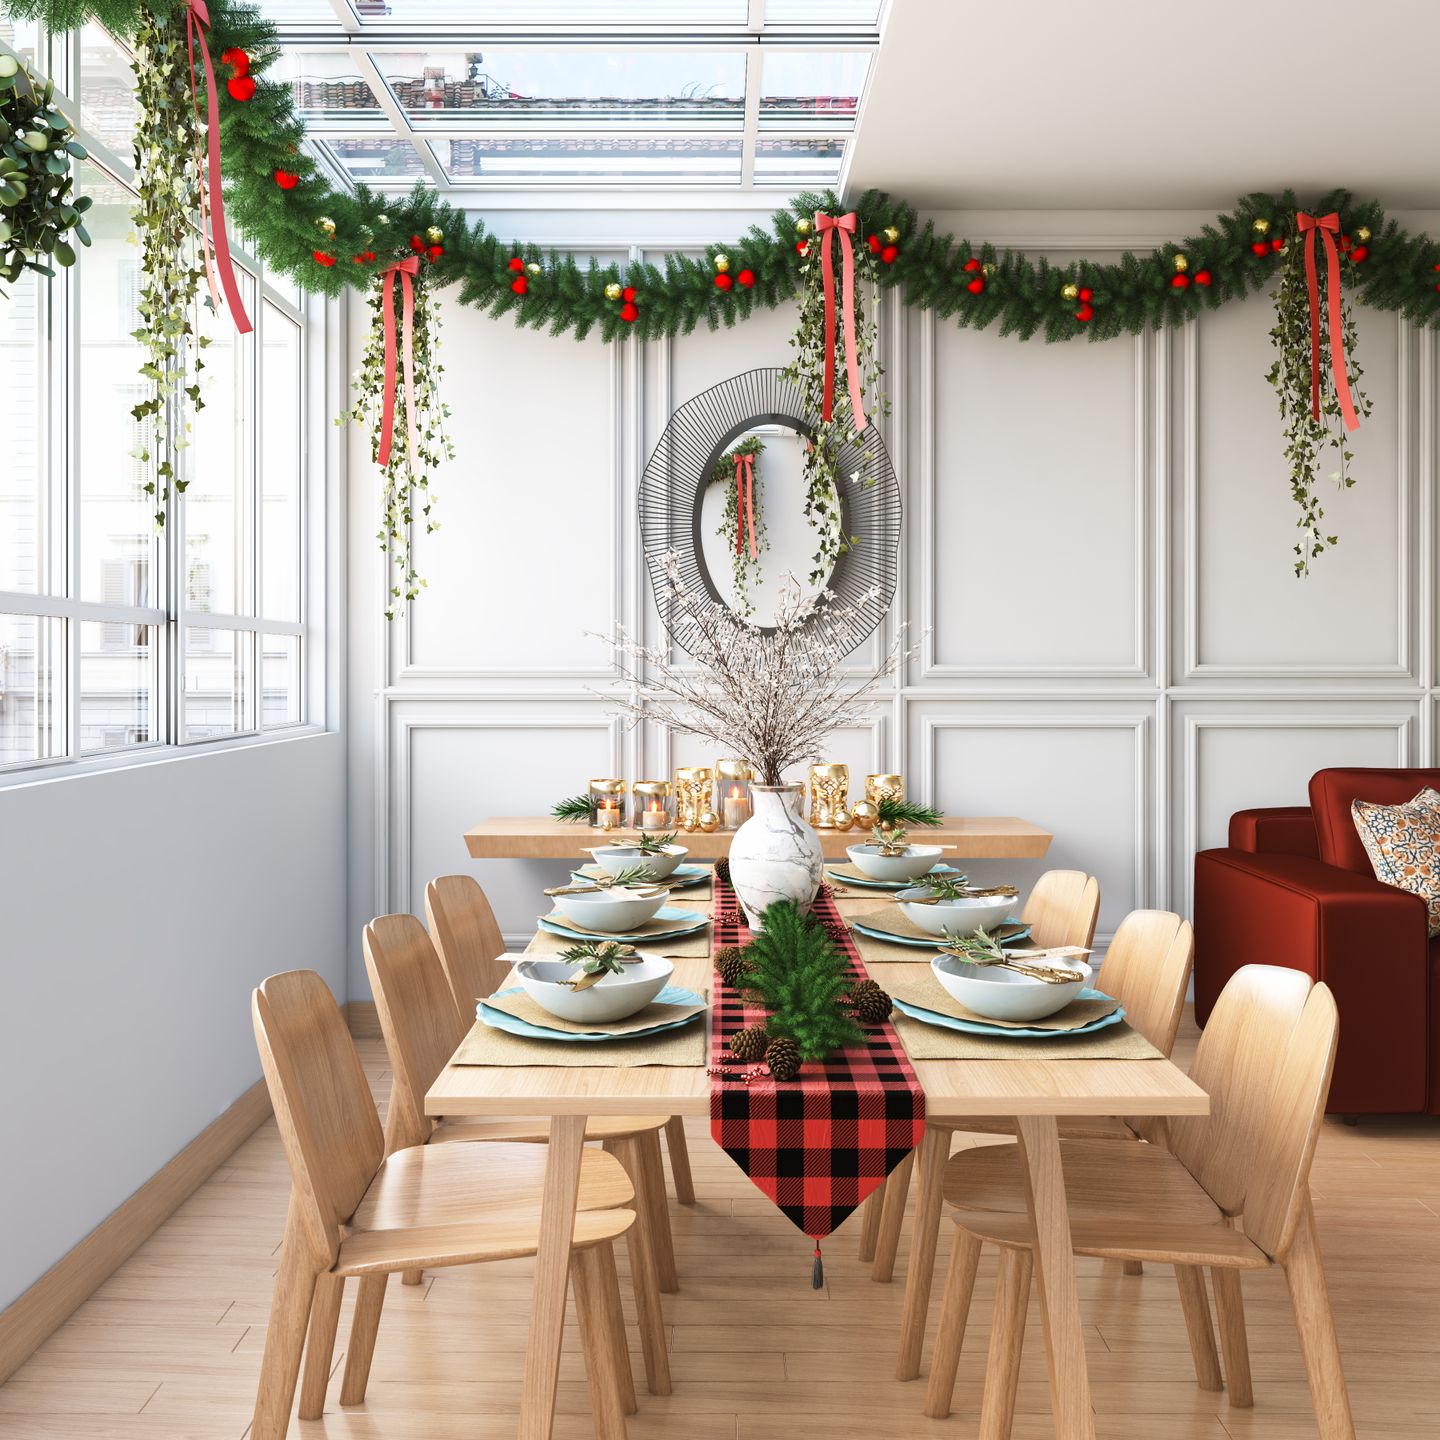 Well Lit Dining Room With Christmas Decor  - Livspace